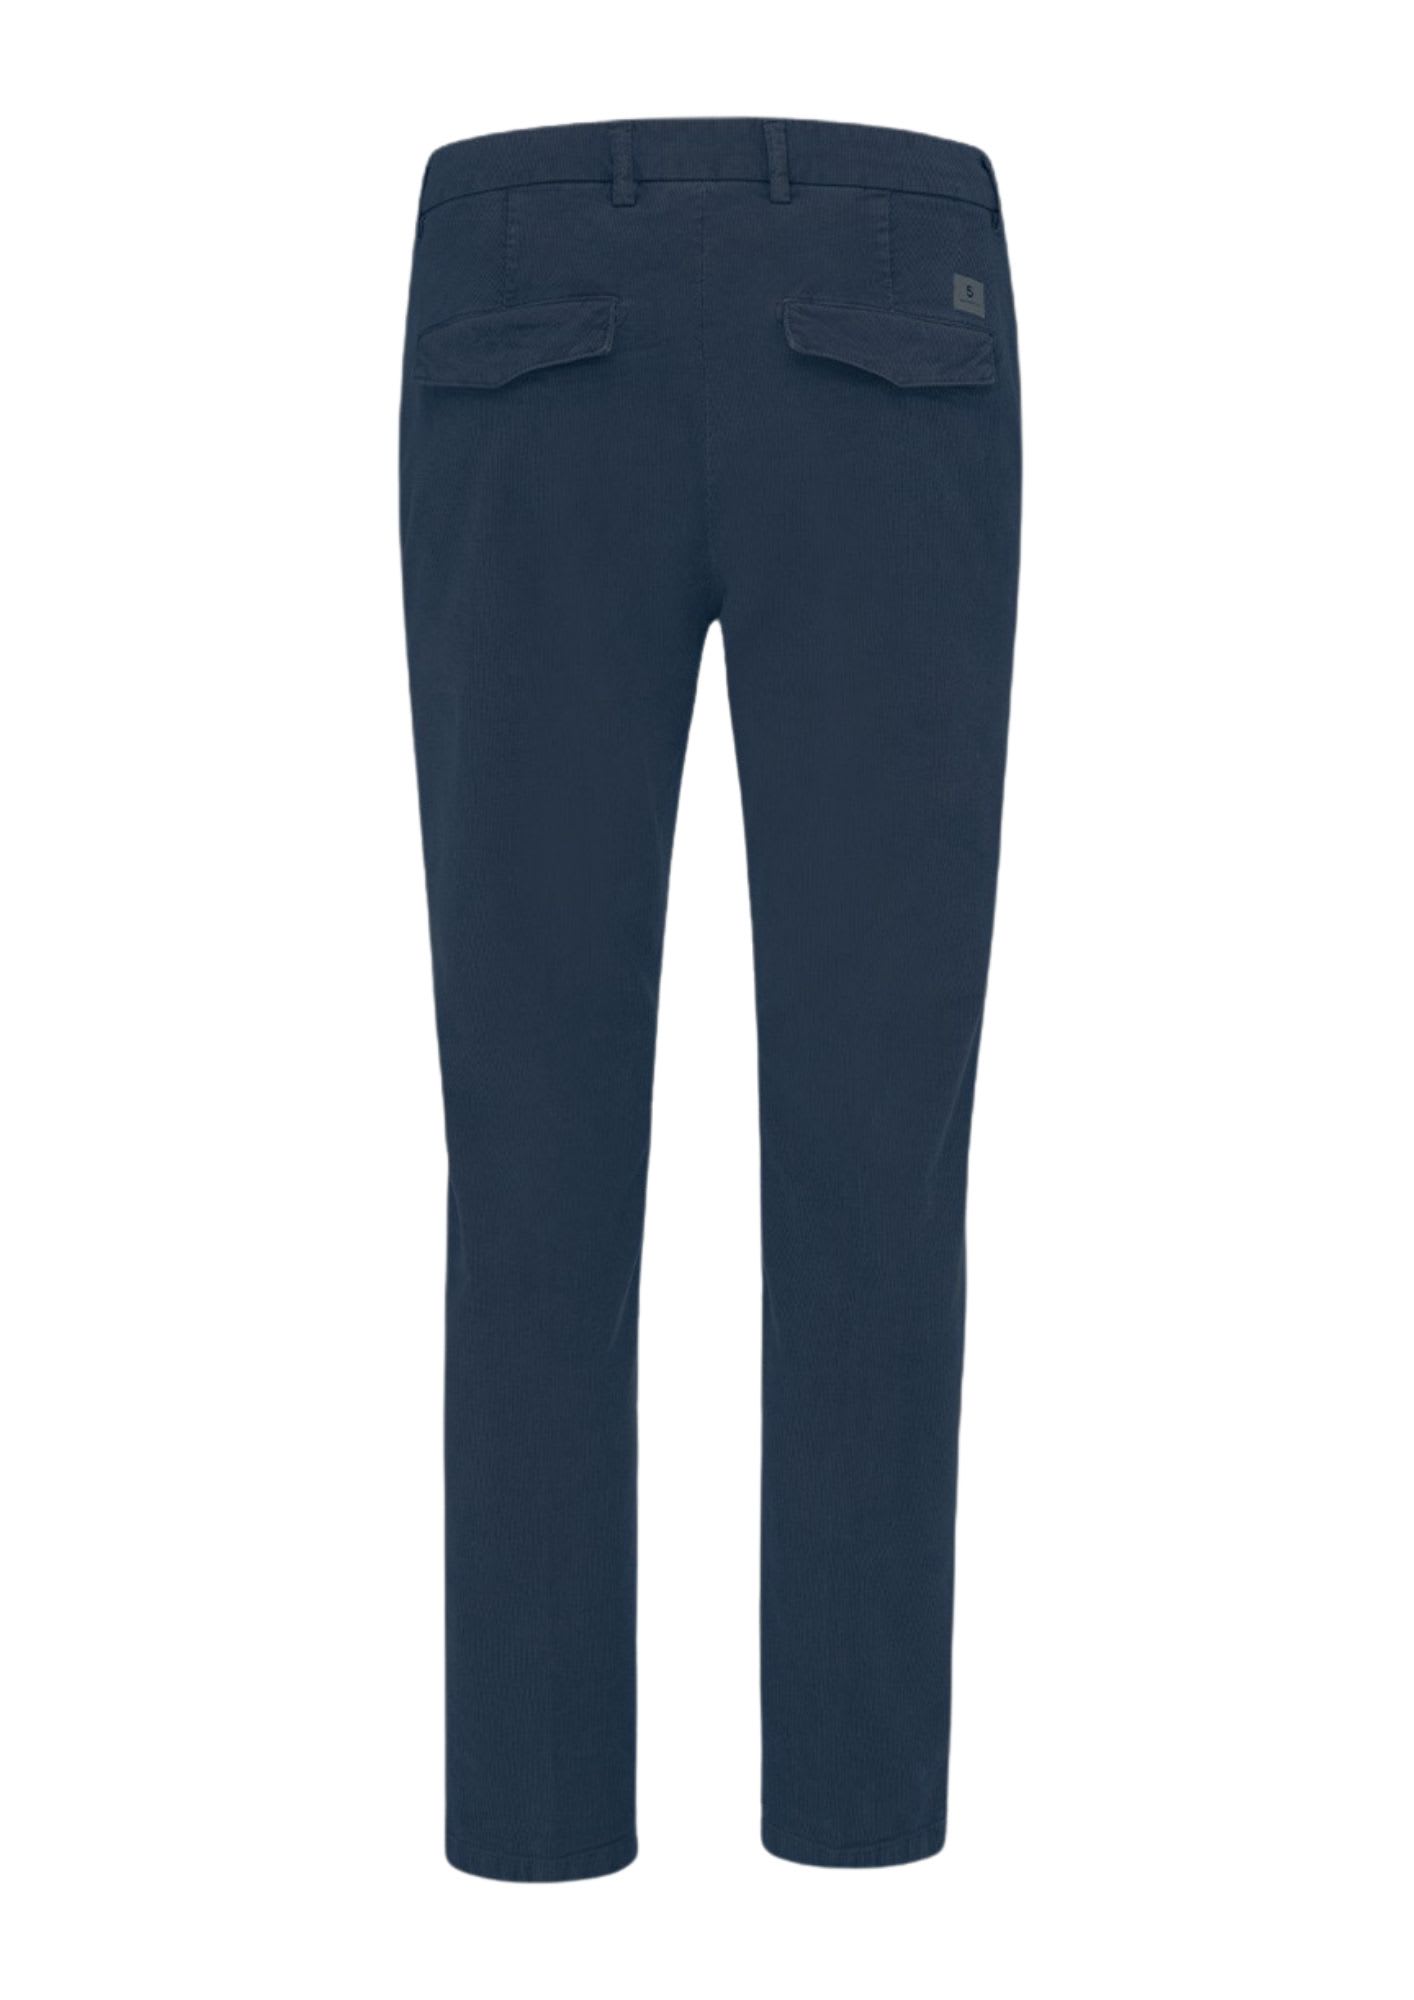 Shop Department Five Prince Pences Chinos In Navy